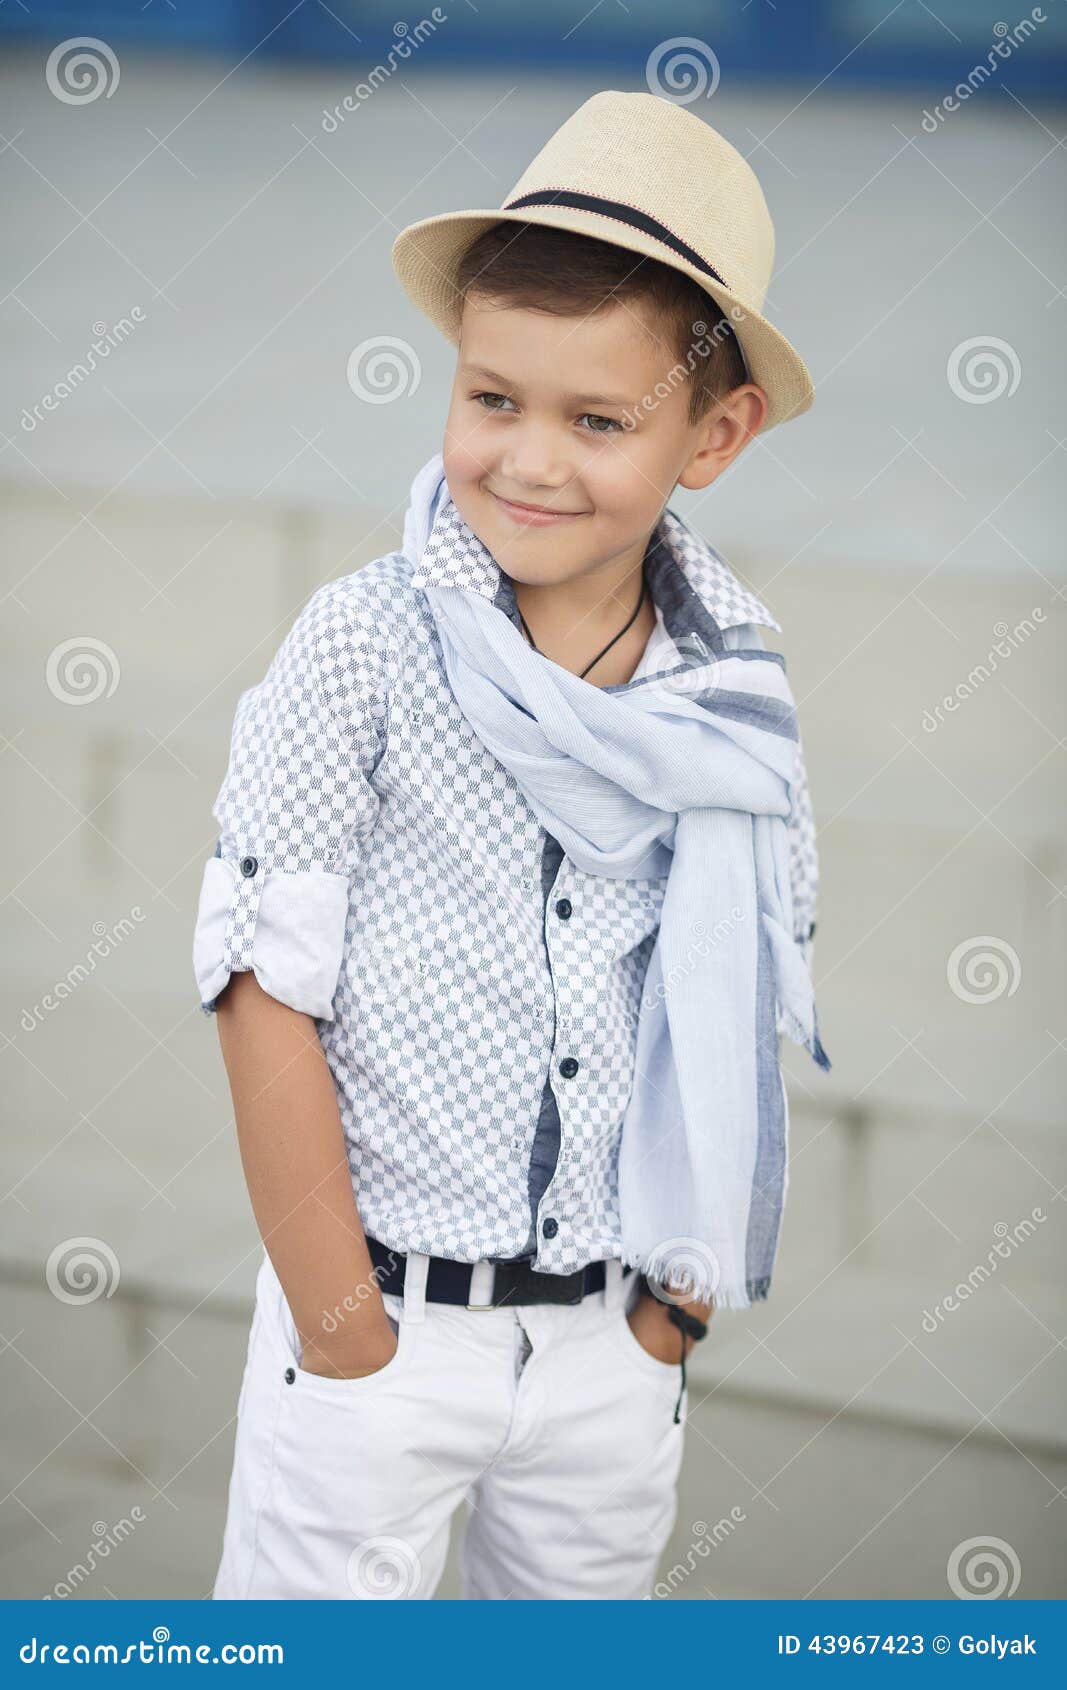 Cute Boy Happy Kid Outdoors Stock Image - Image of fashionable ...